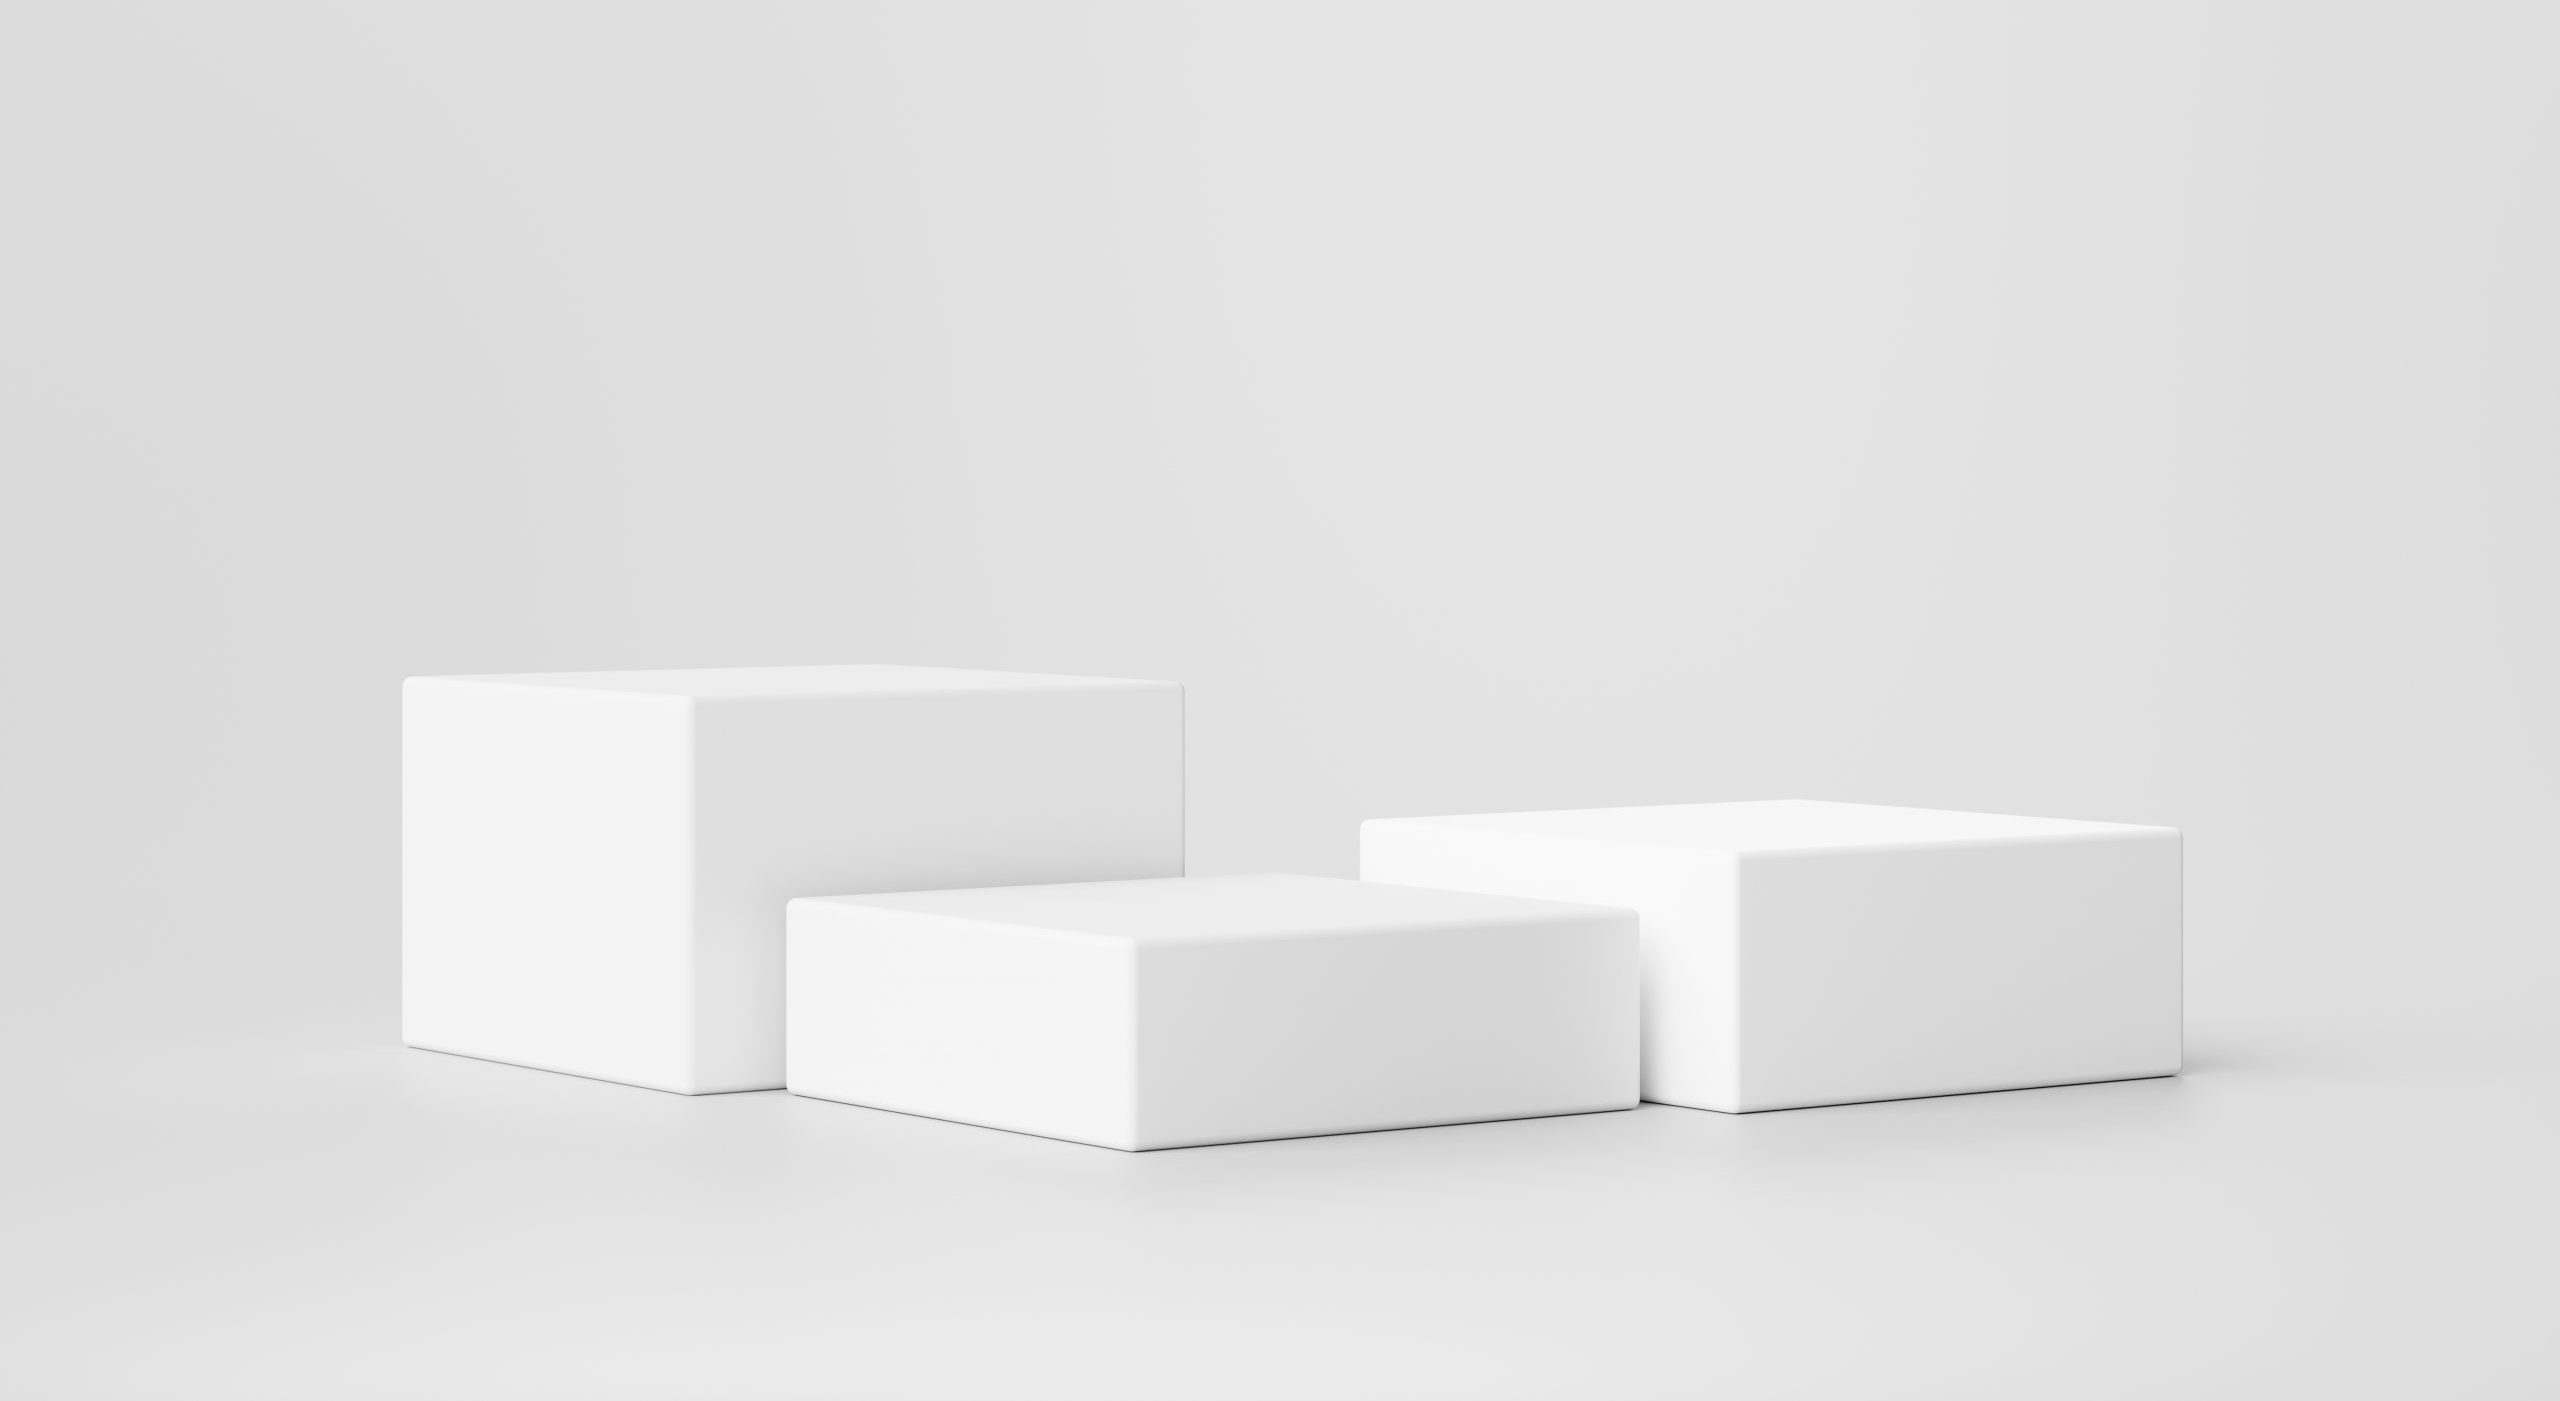 White minimal podium pedestal product display platform for product placement background 3d rendering